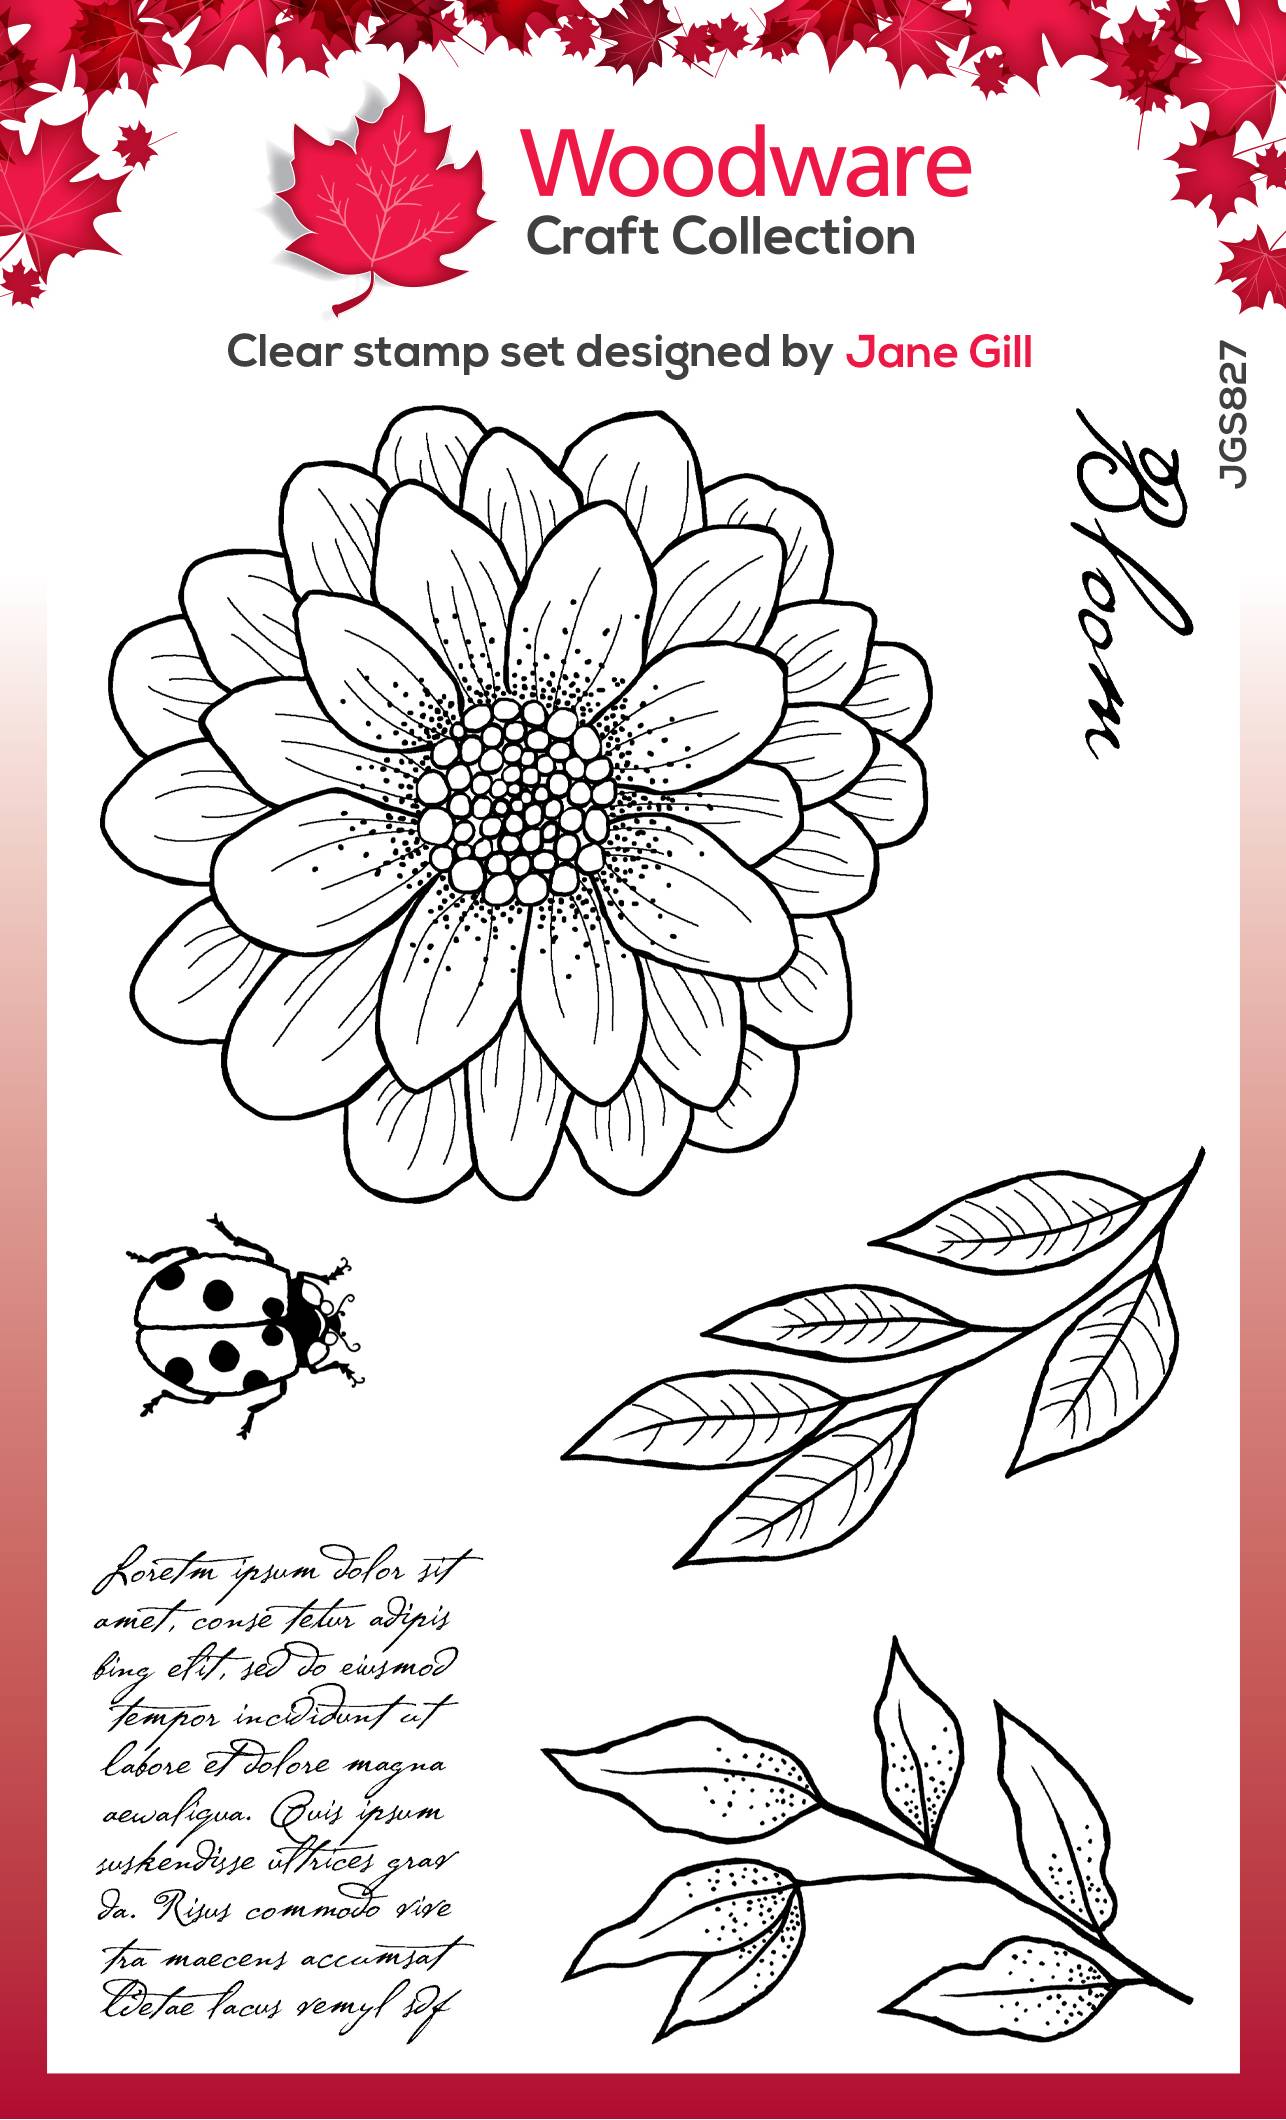 Ditsy Daisy 4 in x 6 in Stamp Clear Singles